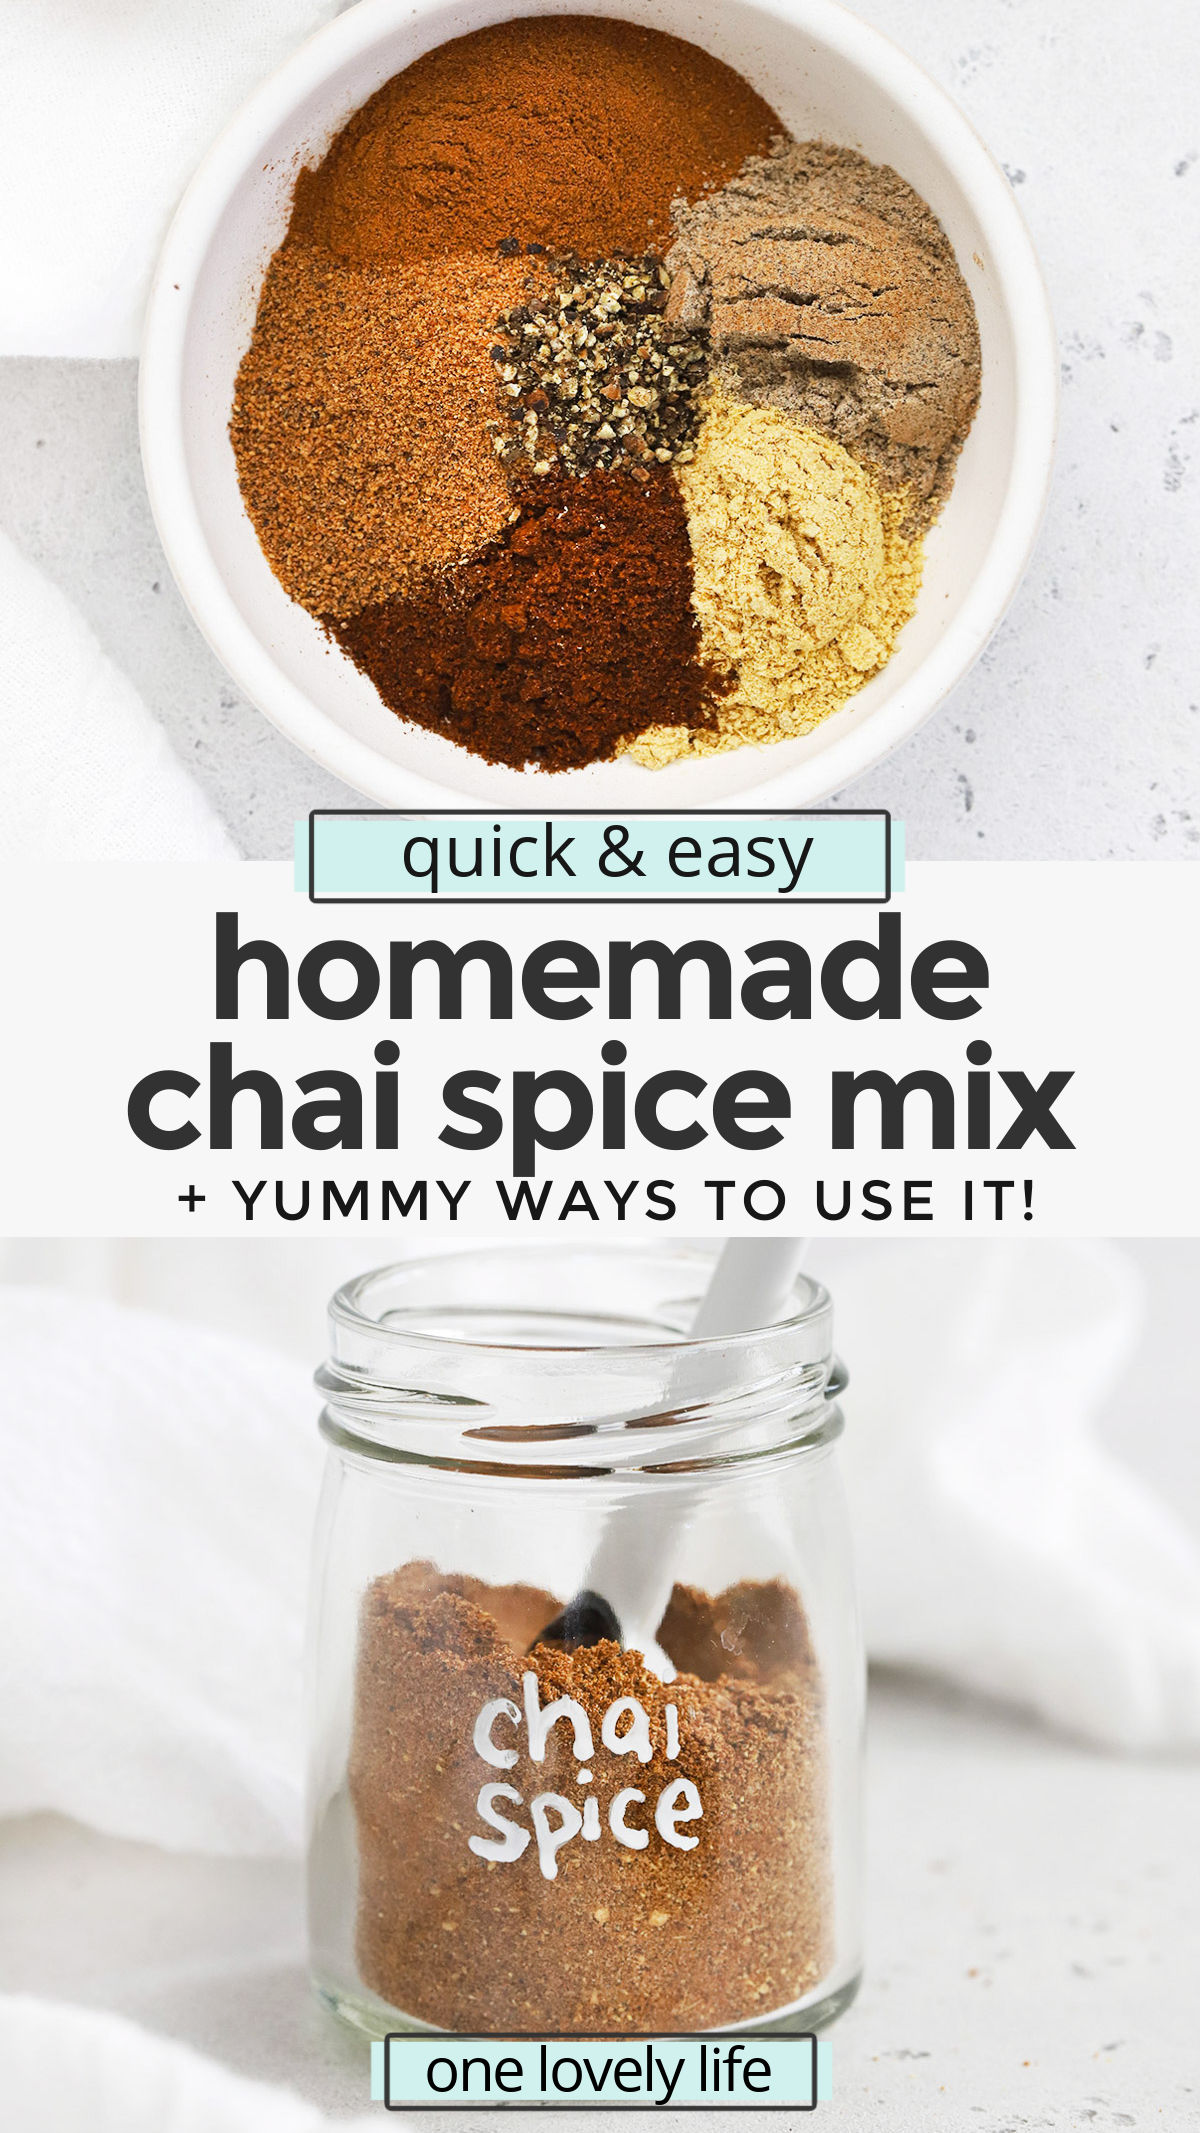 Chai Spice Mix - Learn how to make chai spice mix with our easy recipe! Add it to drinks, baked goods, and so much more. Don't miss all our favorite ways to use it in the post! (Naturally vegan, paleo, Whole30) // DIY Chai Spice // Homemade Chai Mix // Homemade Spice Blend // Chai Spice From Scratch//